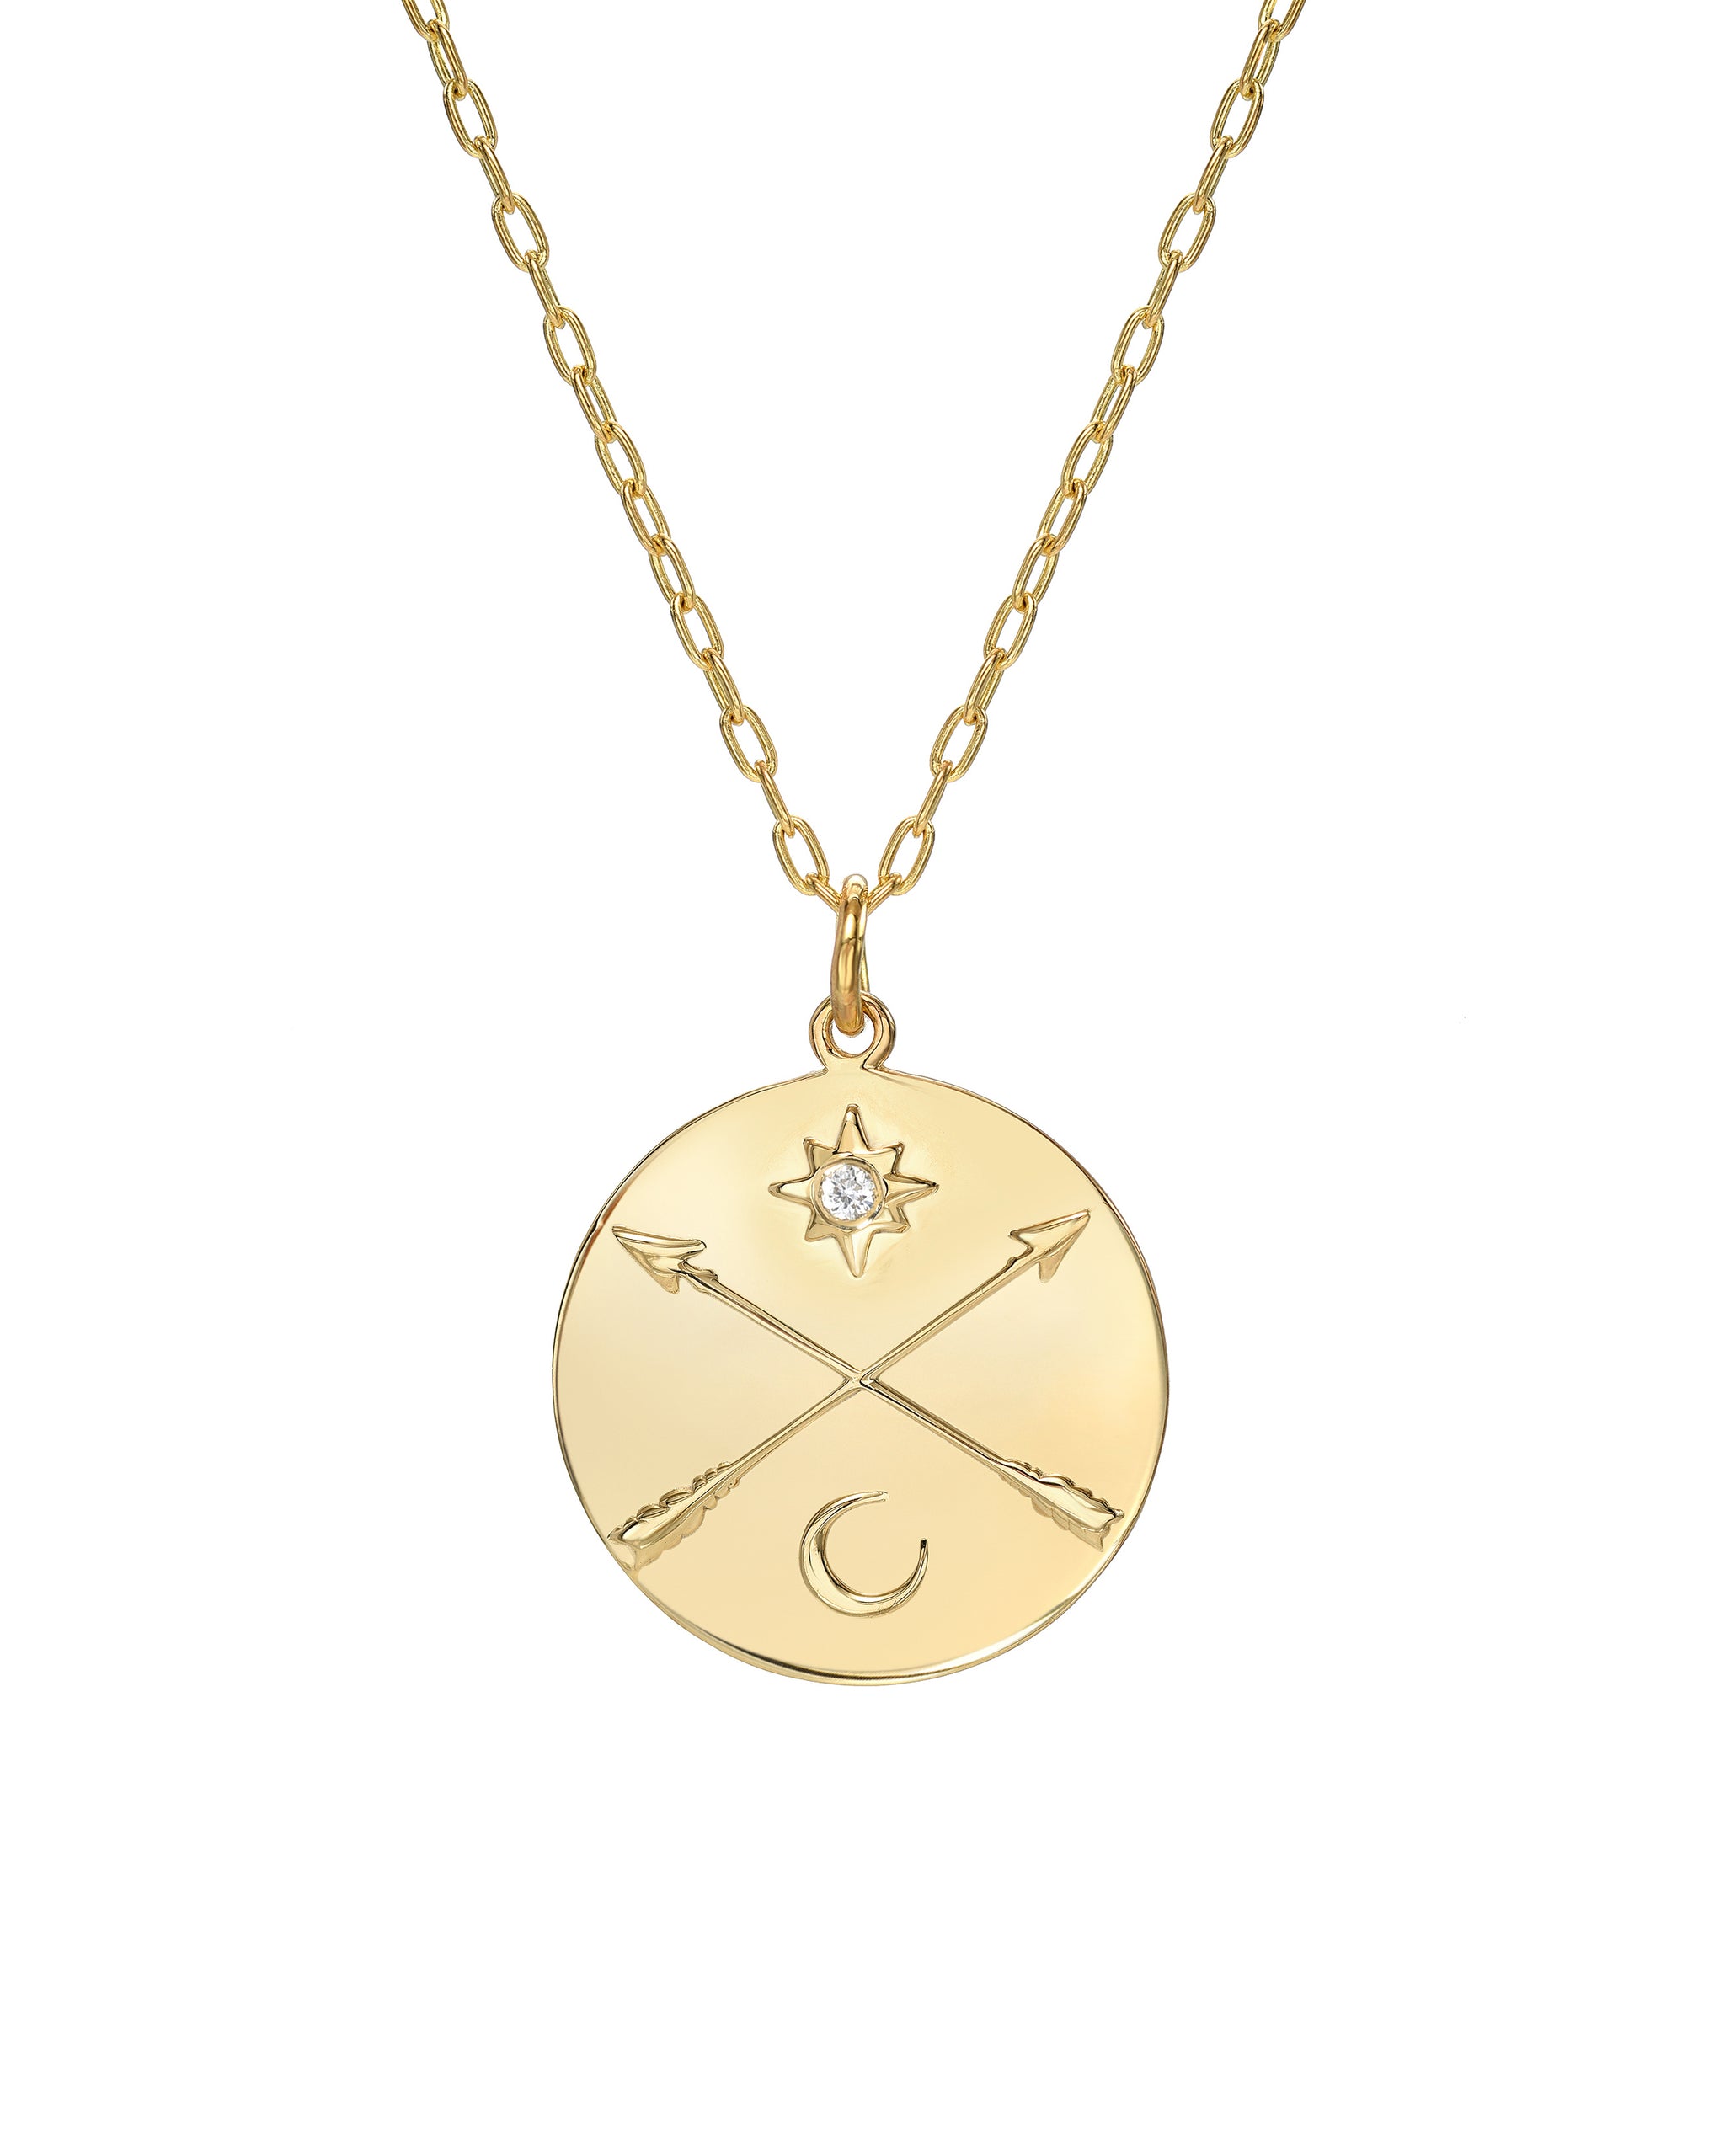 Nomad Necklace, 14k Gold Vermeil Medallion with Crossed Arrows, Sun and Moon and Sleeping Beauty Turquoise, on a 16"-18" Adjustable Chain, Handmade in Los Angeles, California